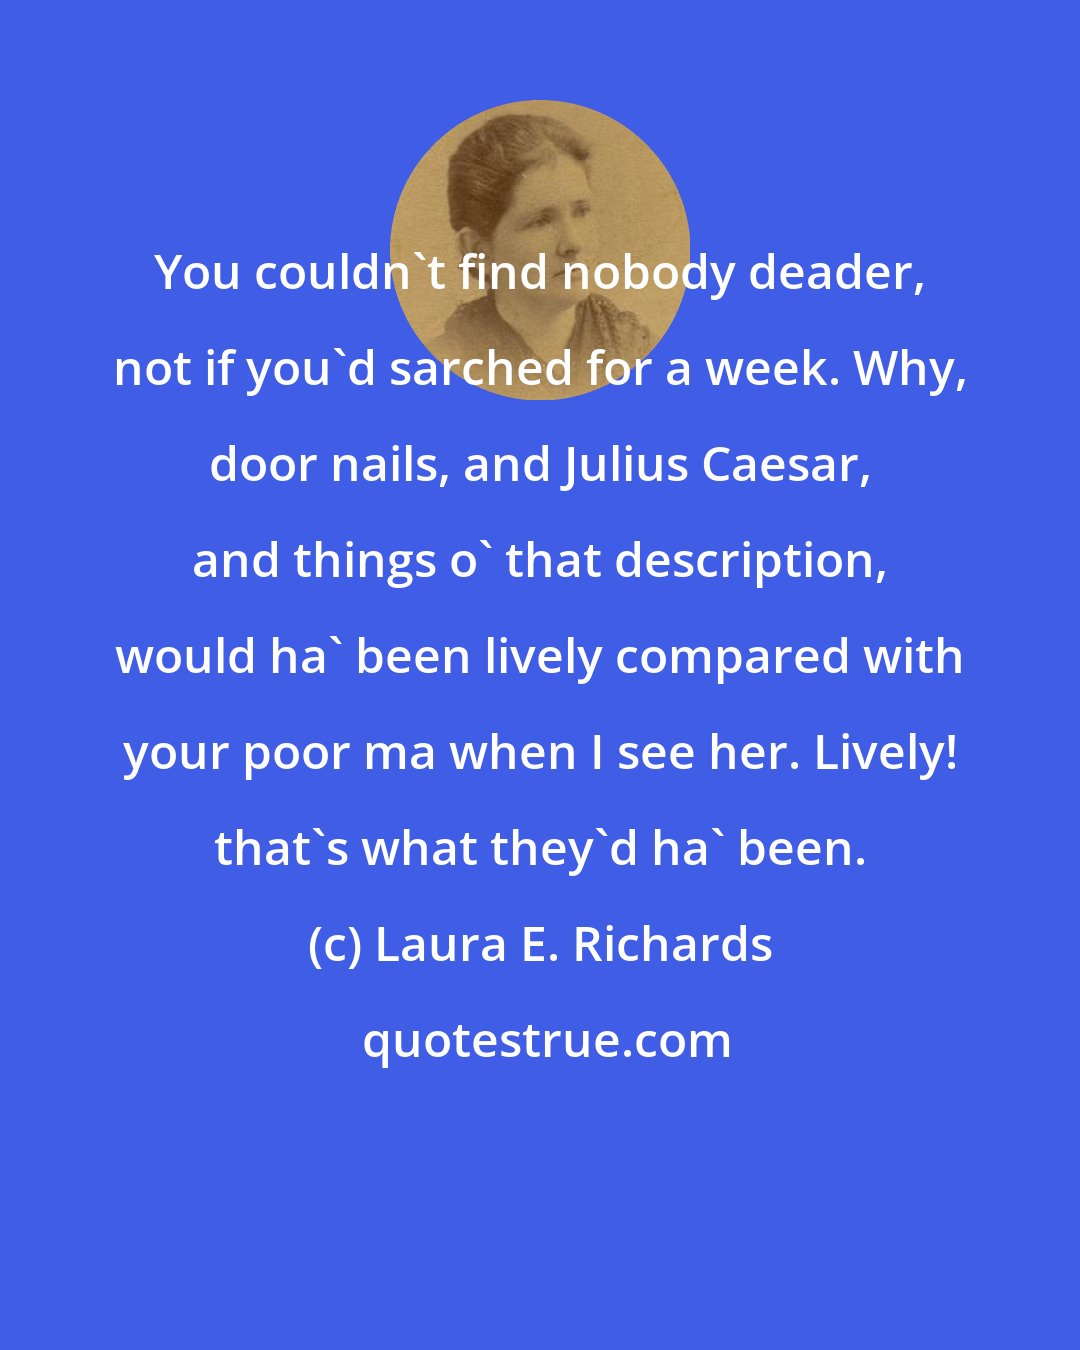 Laura E. Richards: You couldn't find nobody deader, not if you'd sarched for a week. Why, door nails, and Julius Caesar, and things o' that description, would ha' been lively compared with your poor ma when I see her. Lively! that's what they'd ha' been.